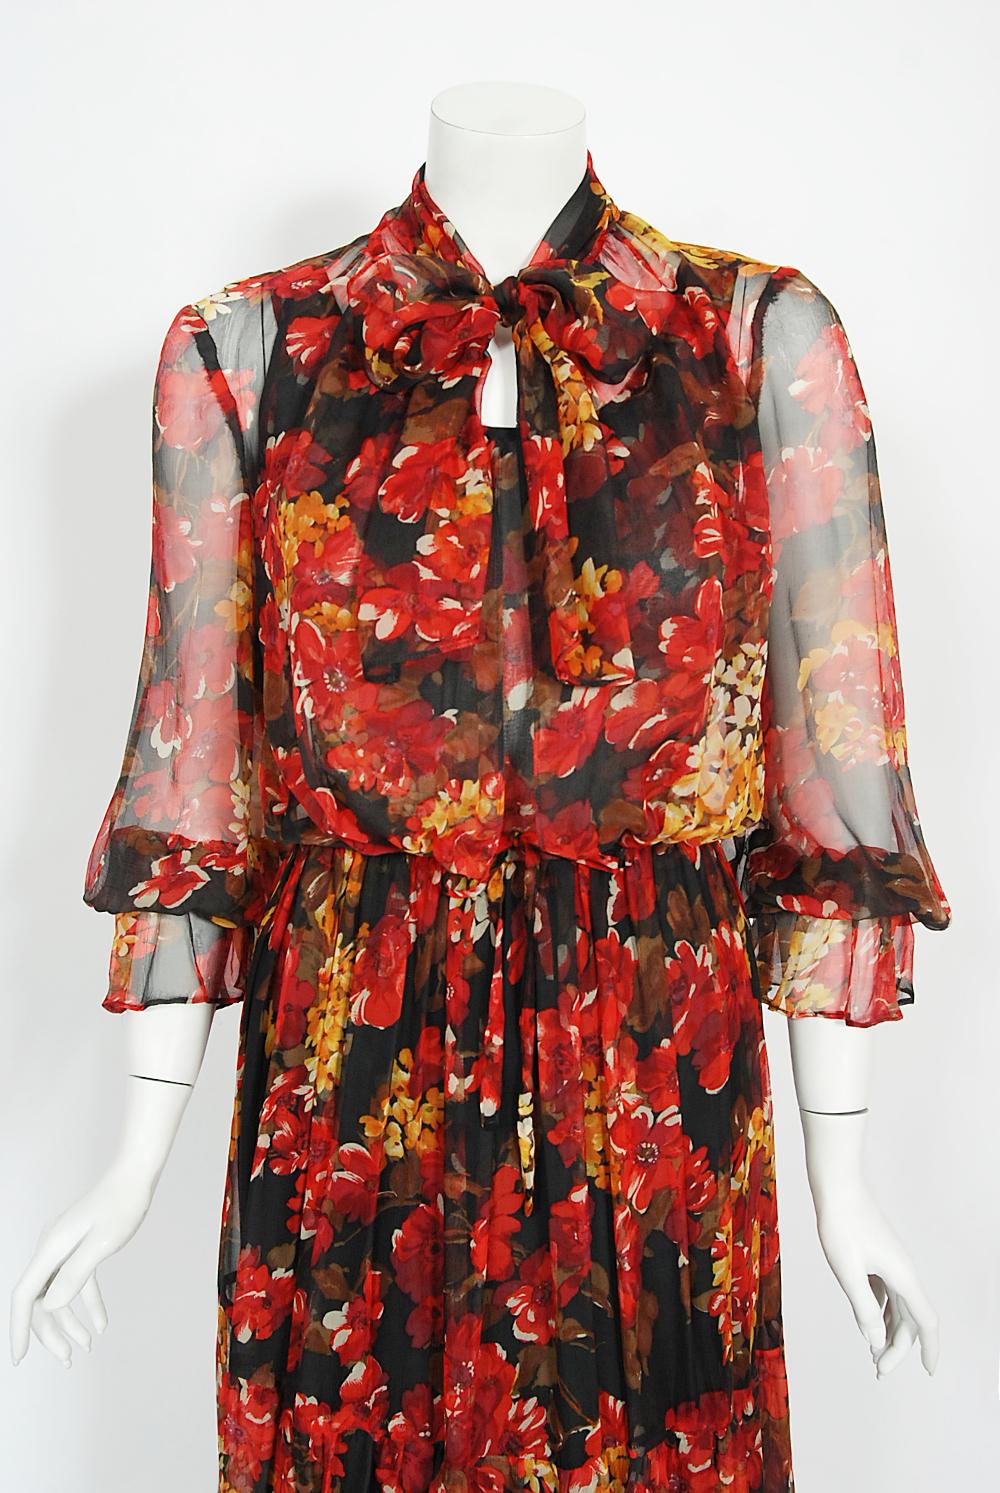 An ultra-chic 1970's fiery sunset floral print silk chiffon maxi dress ensemble from Léron of New York. Perfect wedding guest or party look! For over 100 years, Léron has created custom linens and fashions designed that combine comfort and beauty.